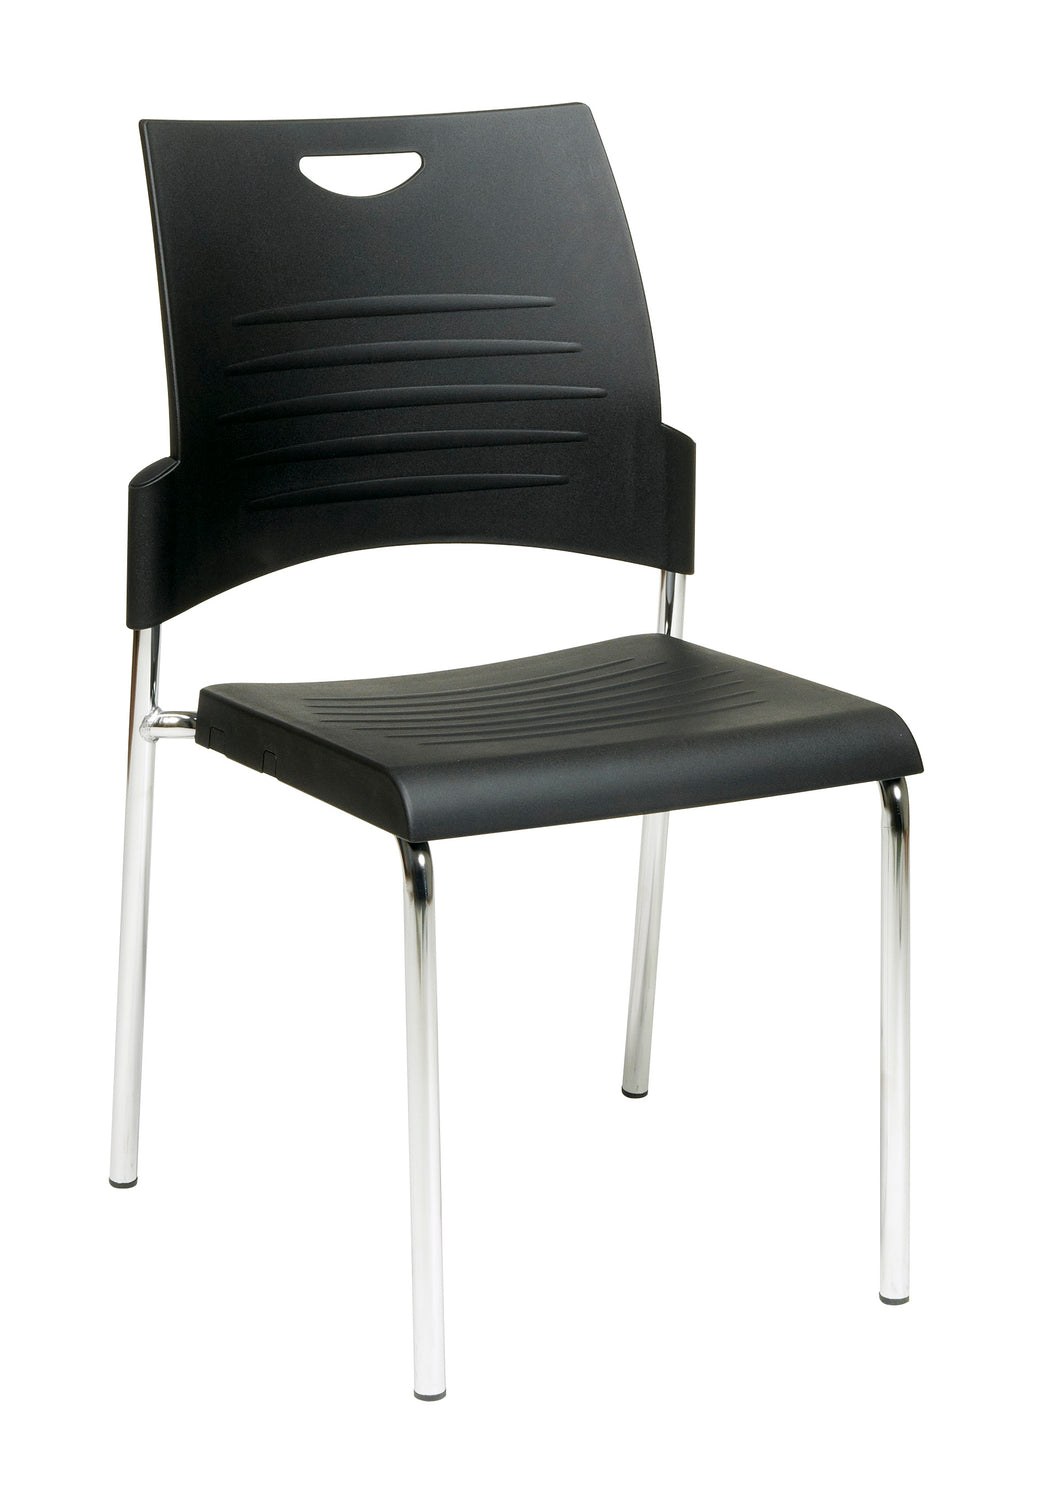 STC8300C2 - Straight Leg Stacking Chair / 2 pack by OSP